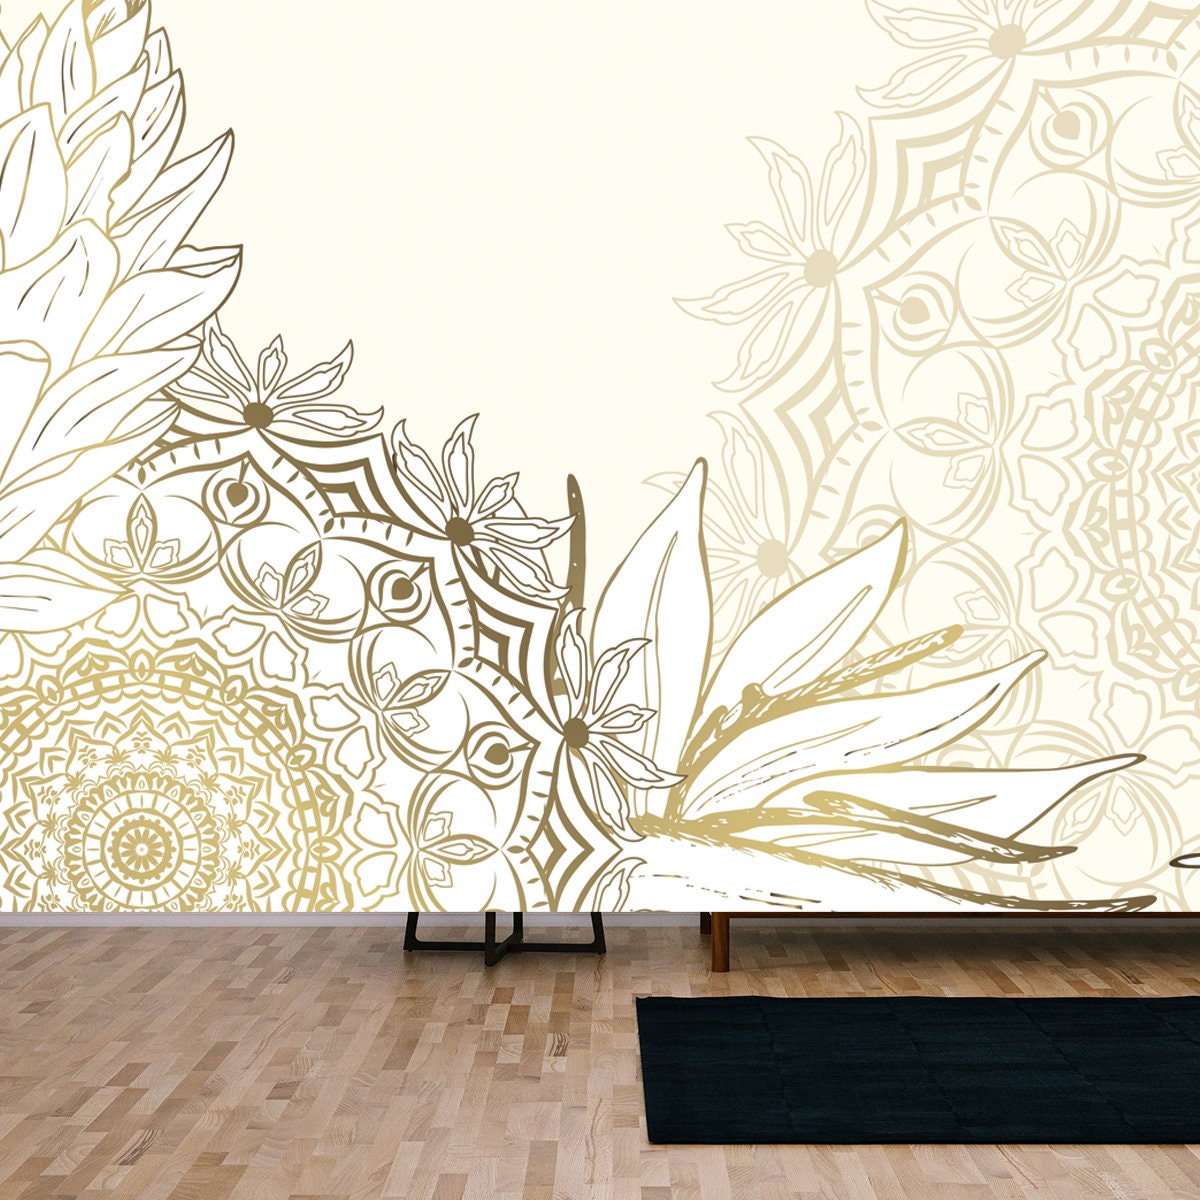 Luxurious Tropical Flowers and Mandala. Background Vector with Gold Metallic Decor Wallpaper Living Room Mural